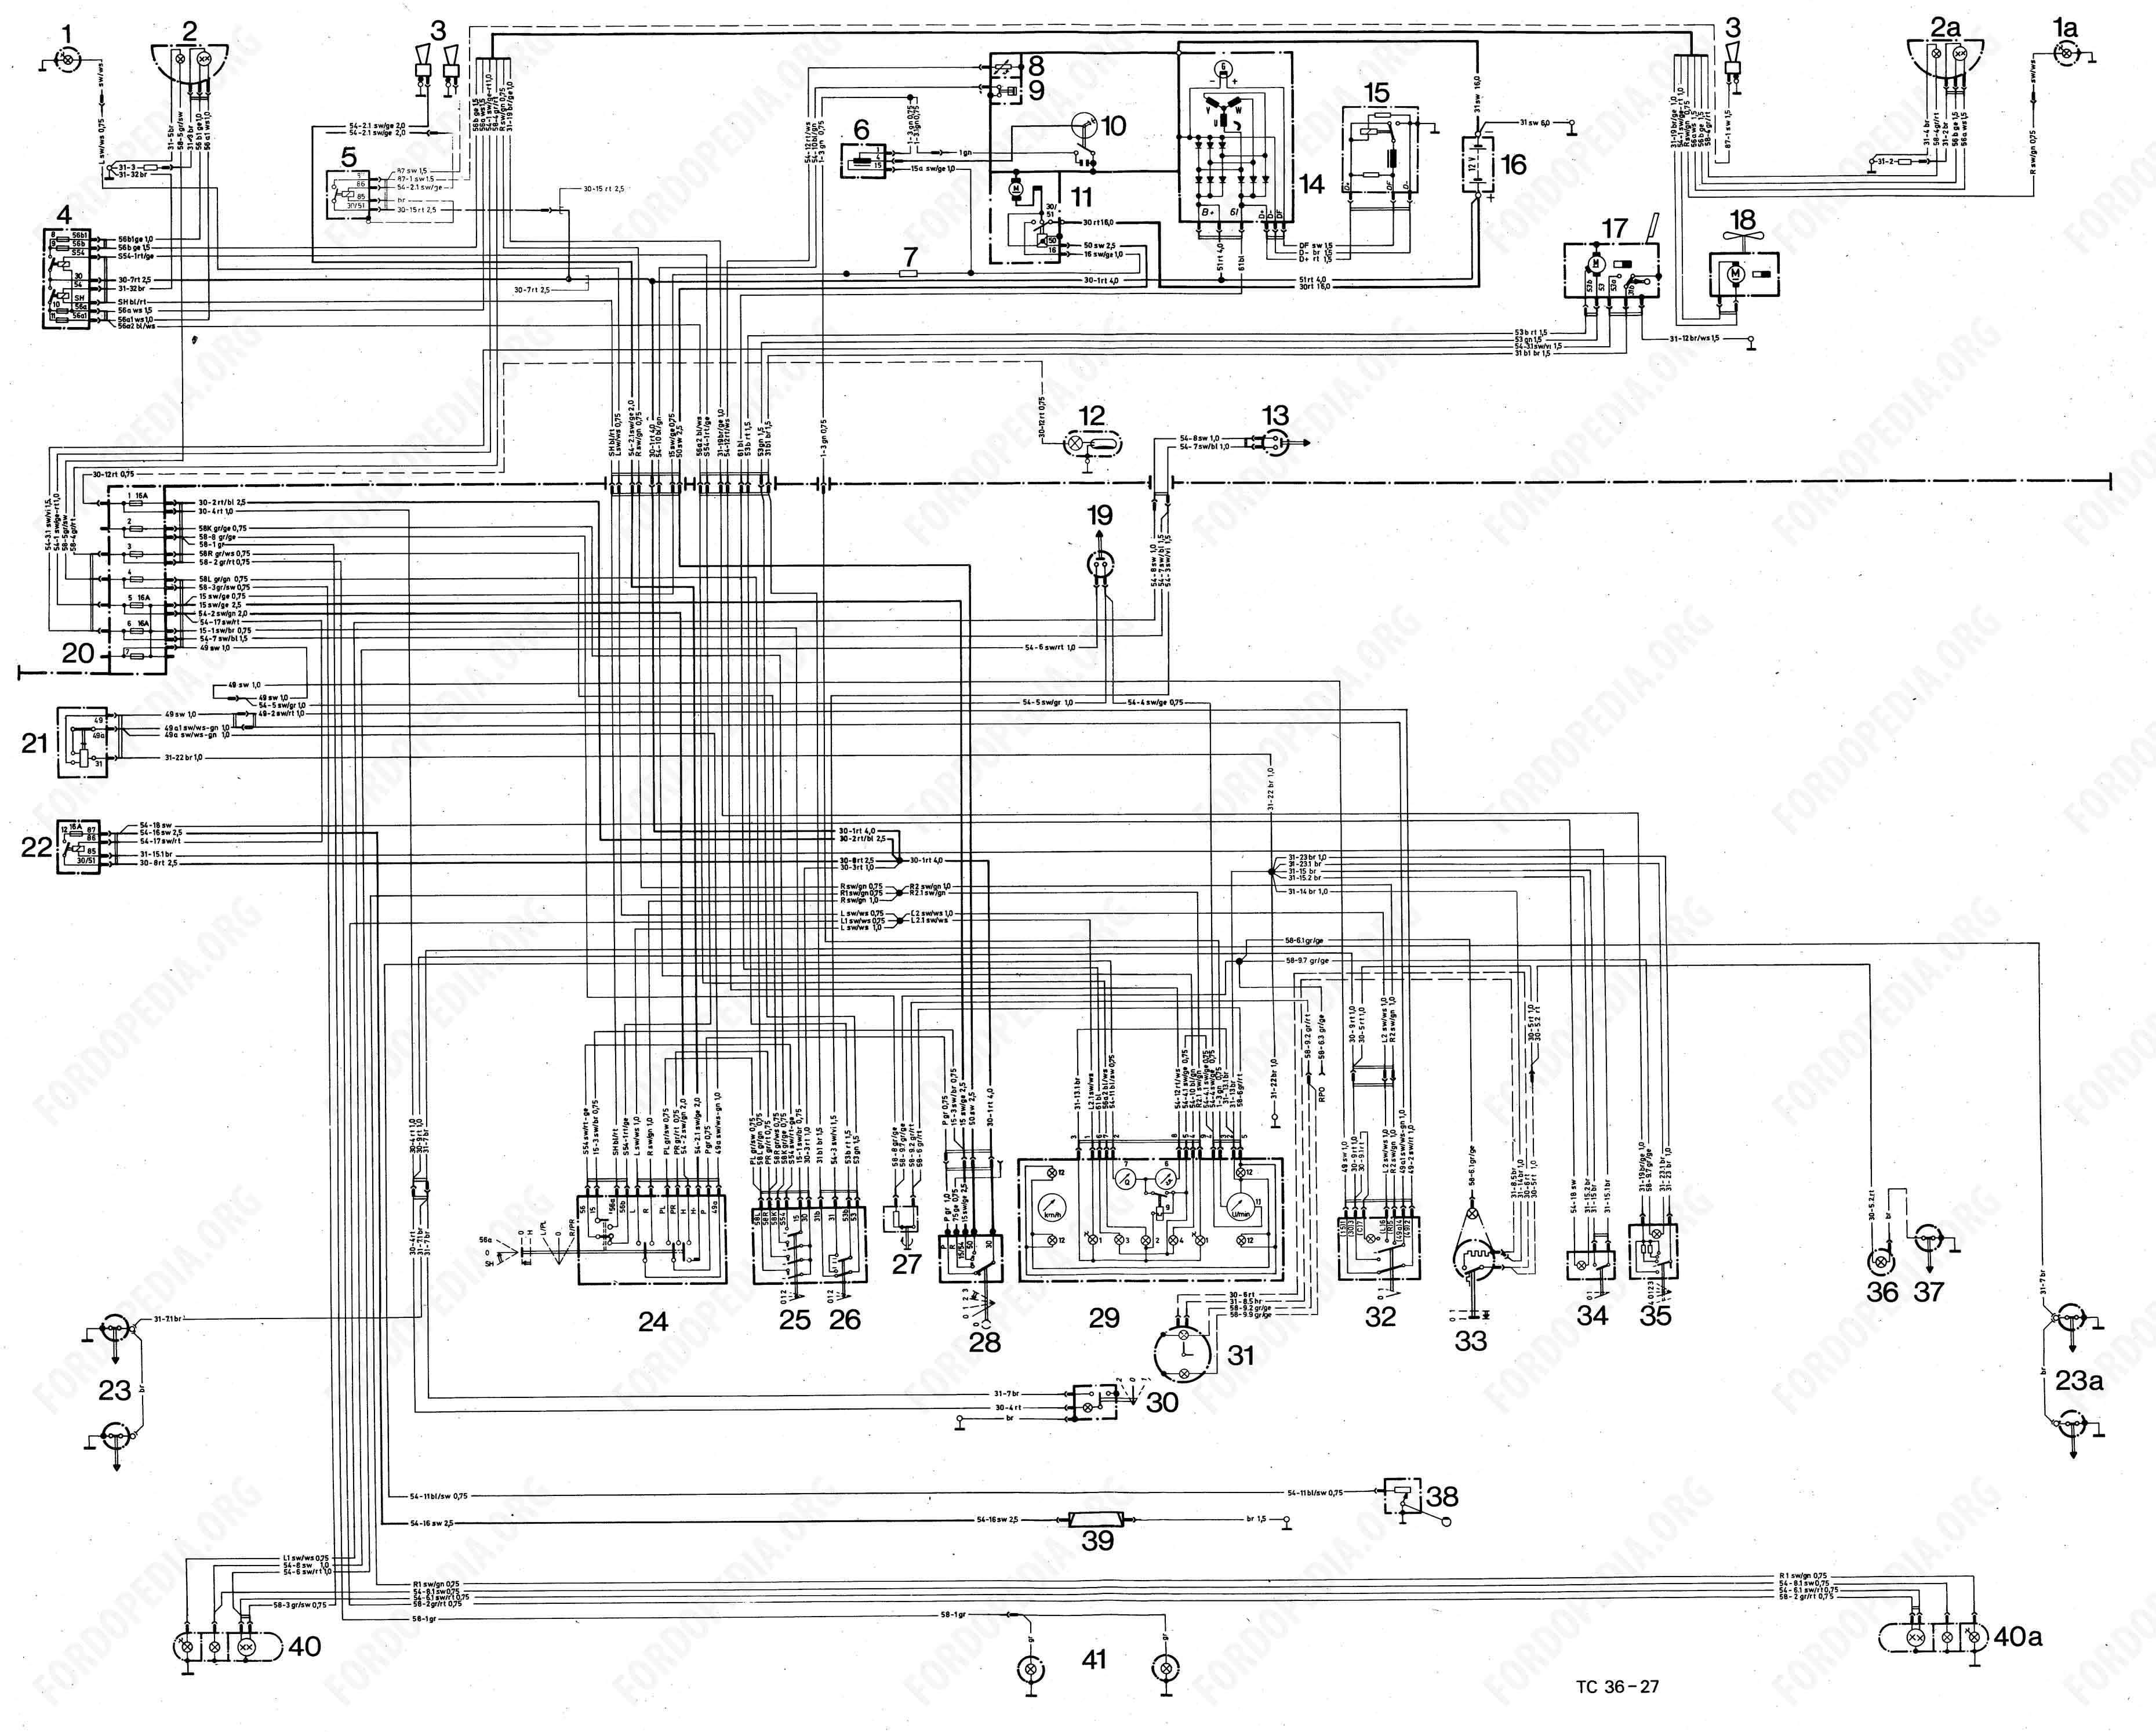 Bmw E46 Instrument Cluster Wiring Diagram from www.fordopedia.org